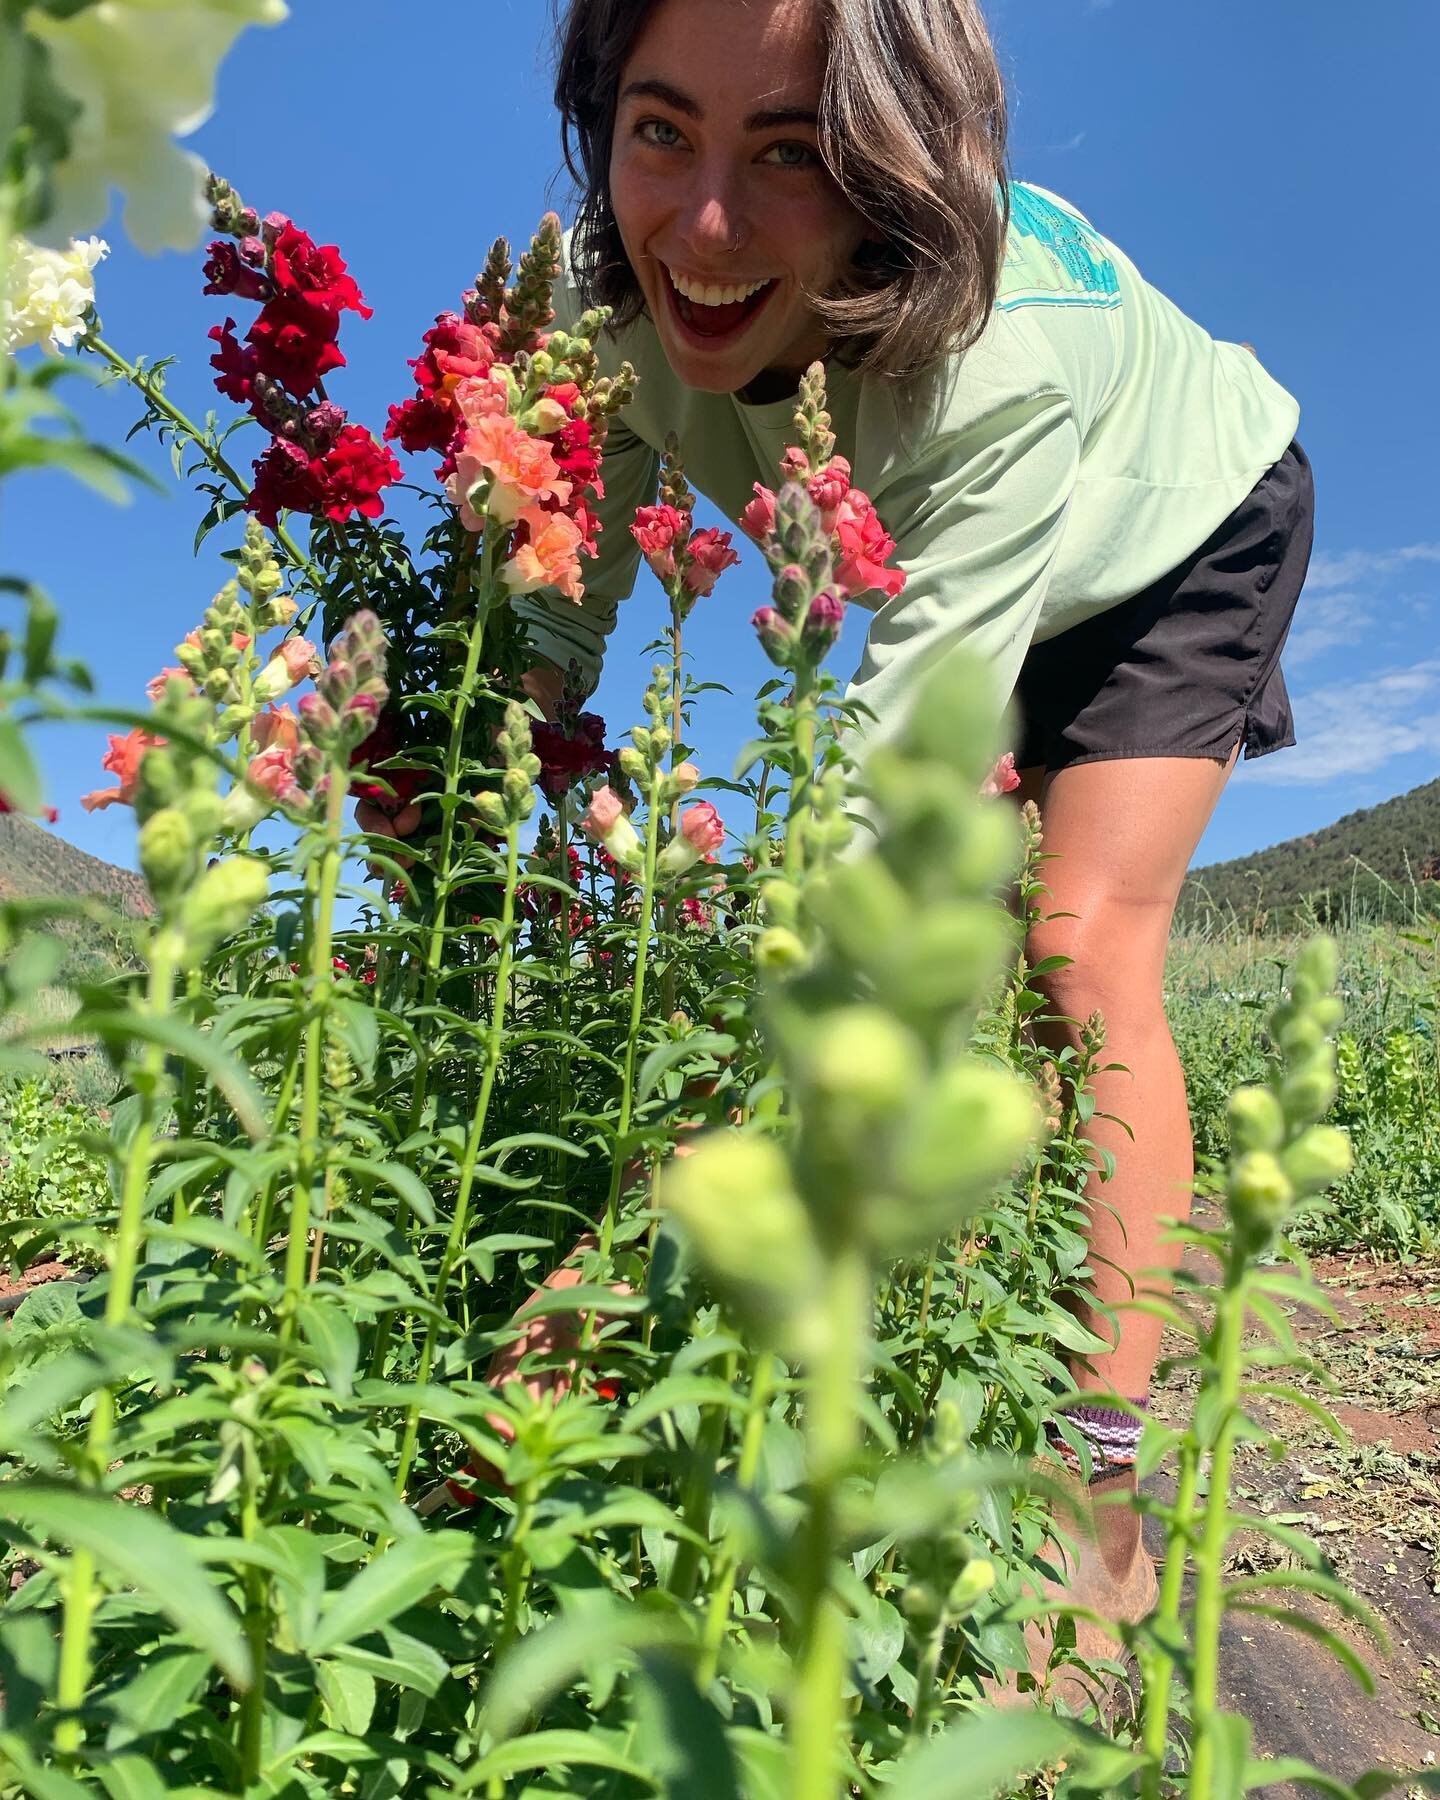 Come work with Juniper this summer!

Seeking a part-time employee for the summer to help on the farm AND with floral design. Approximately 3 days/week. :) 

For more information visit link in bio / website (juniper-farm.com)